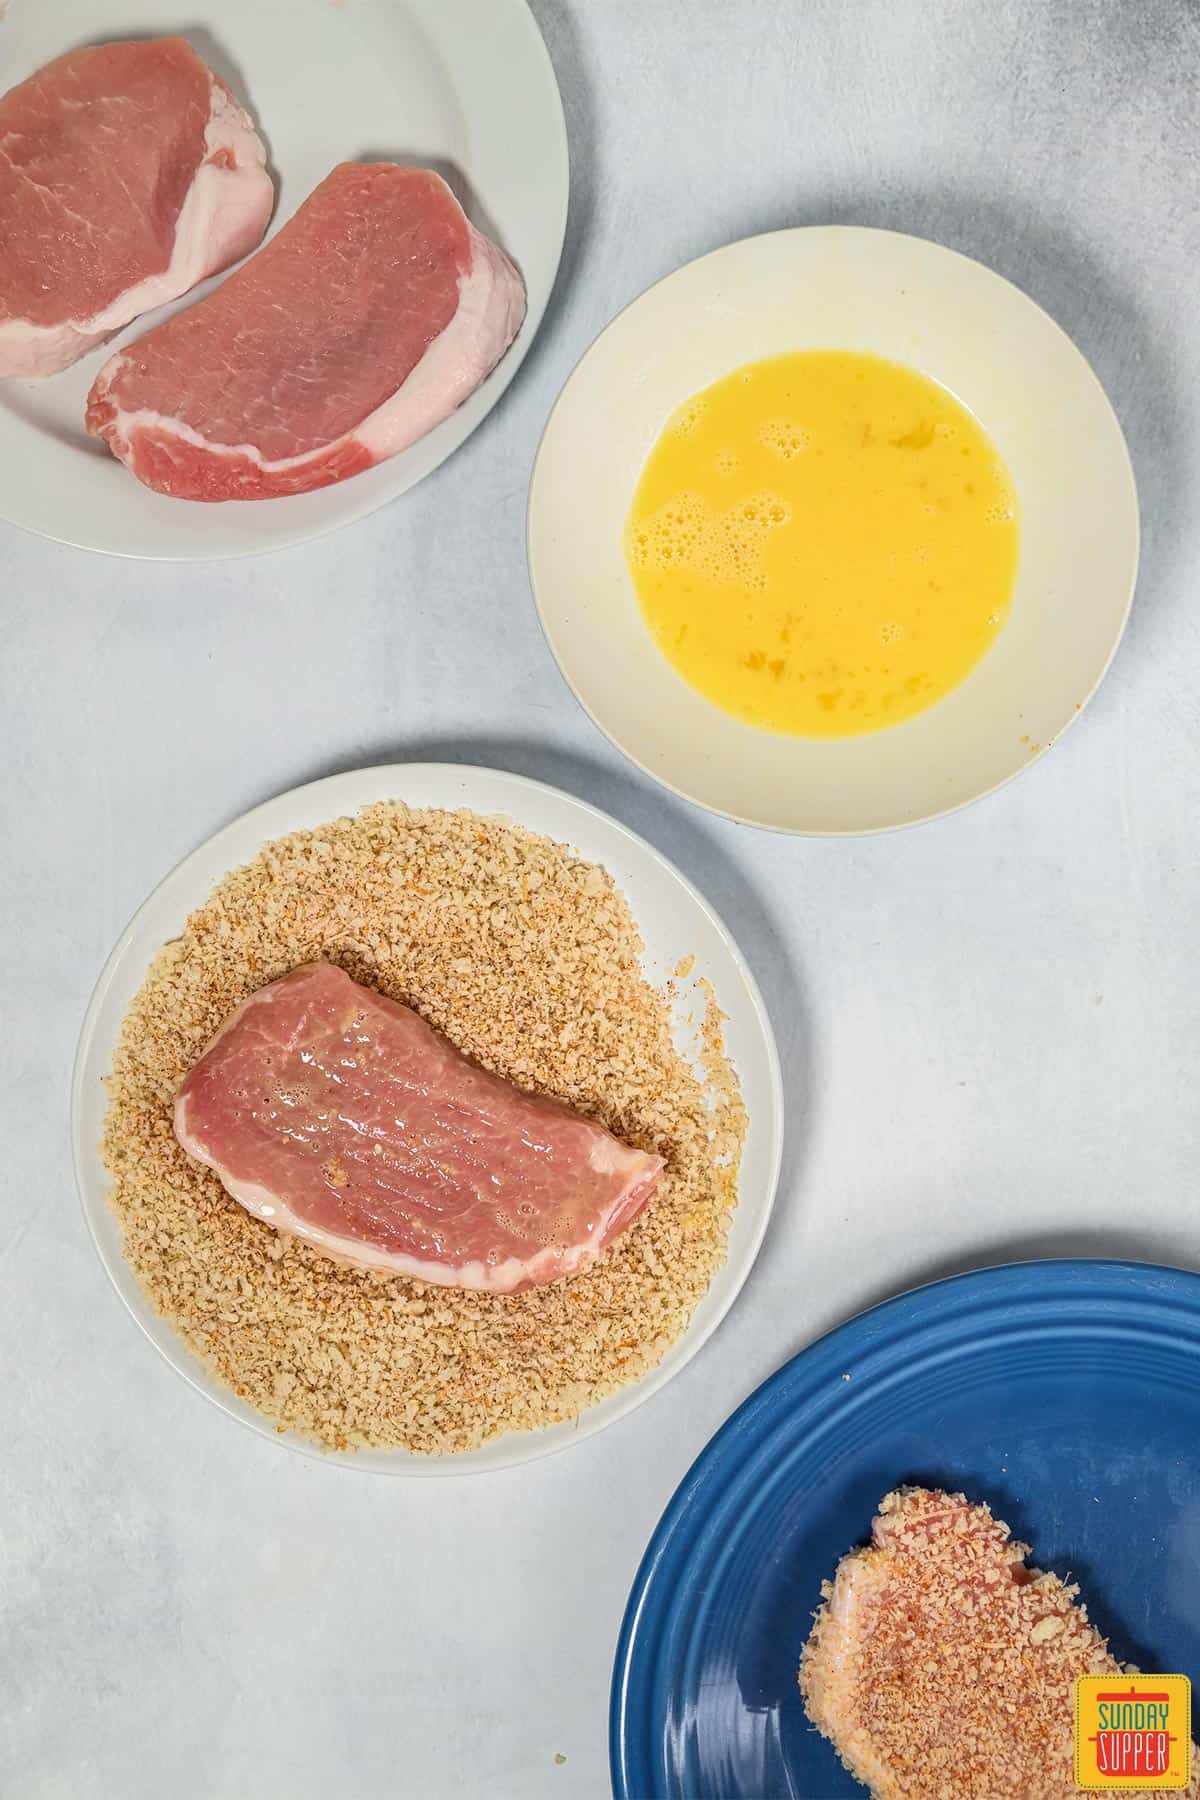 Dredging pork chop in breadcrumbs and egg